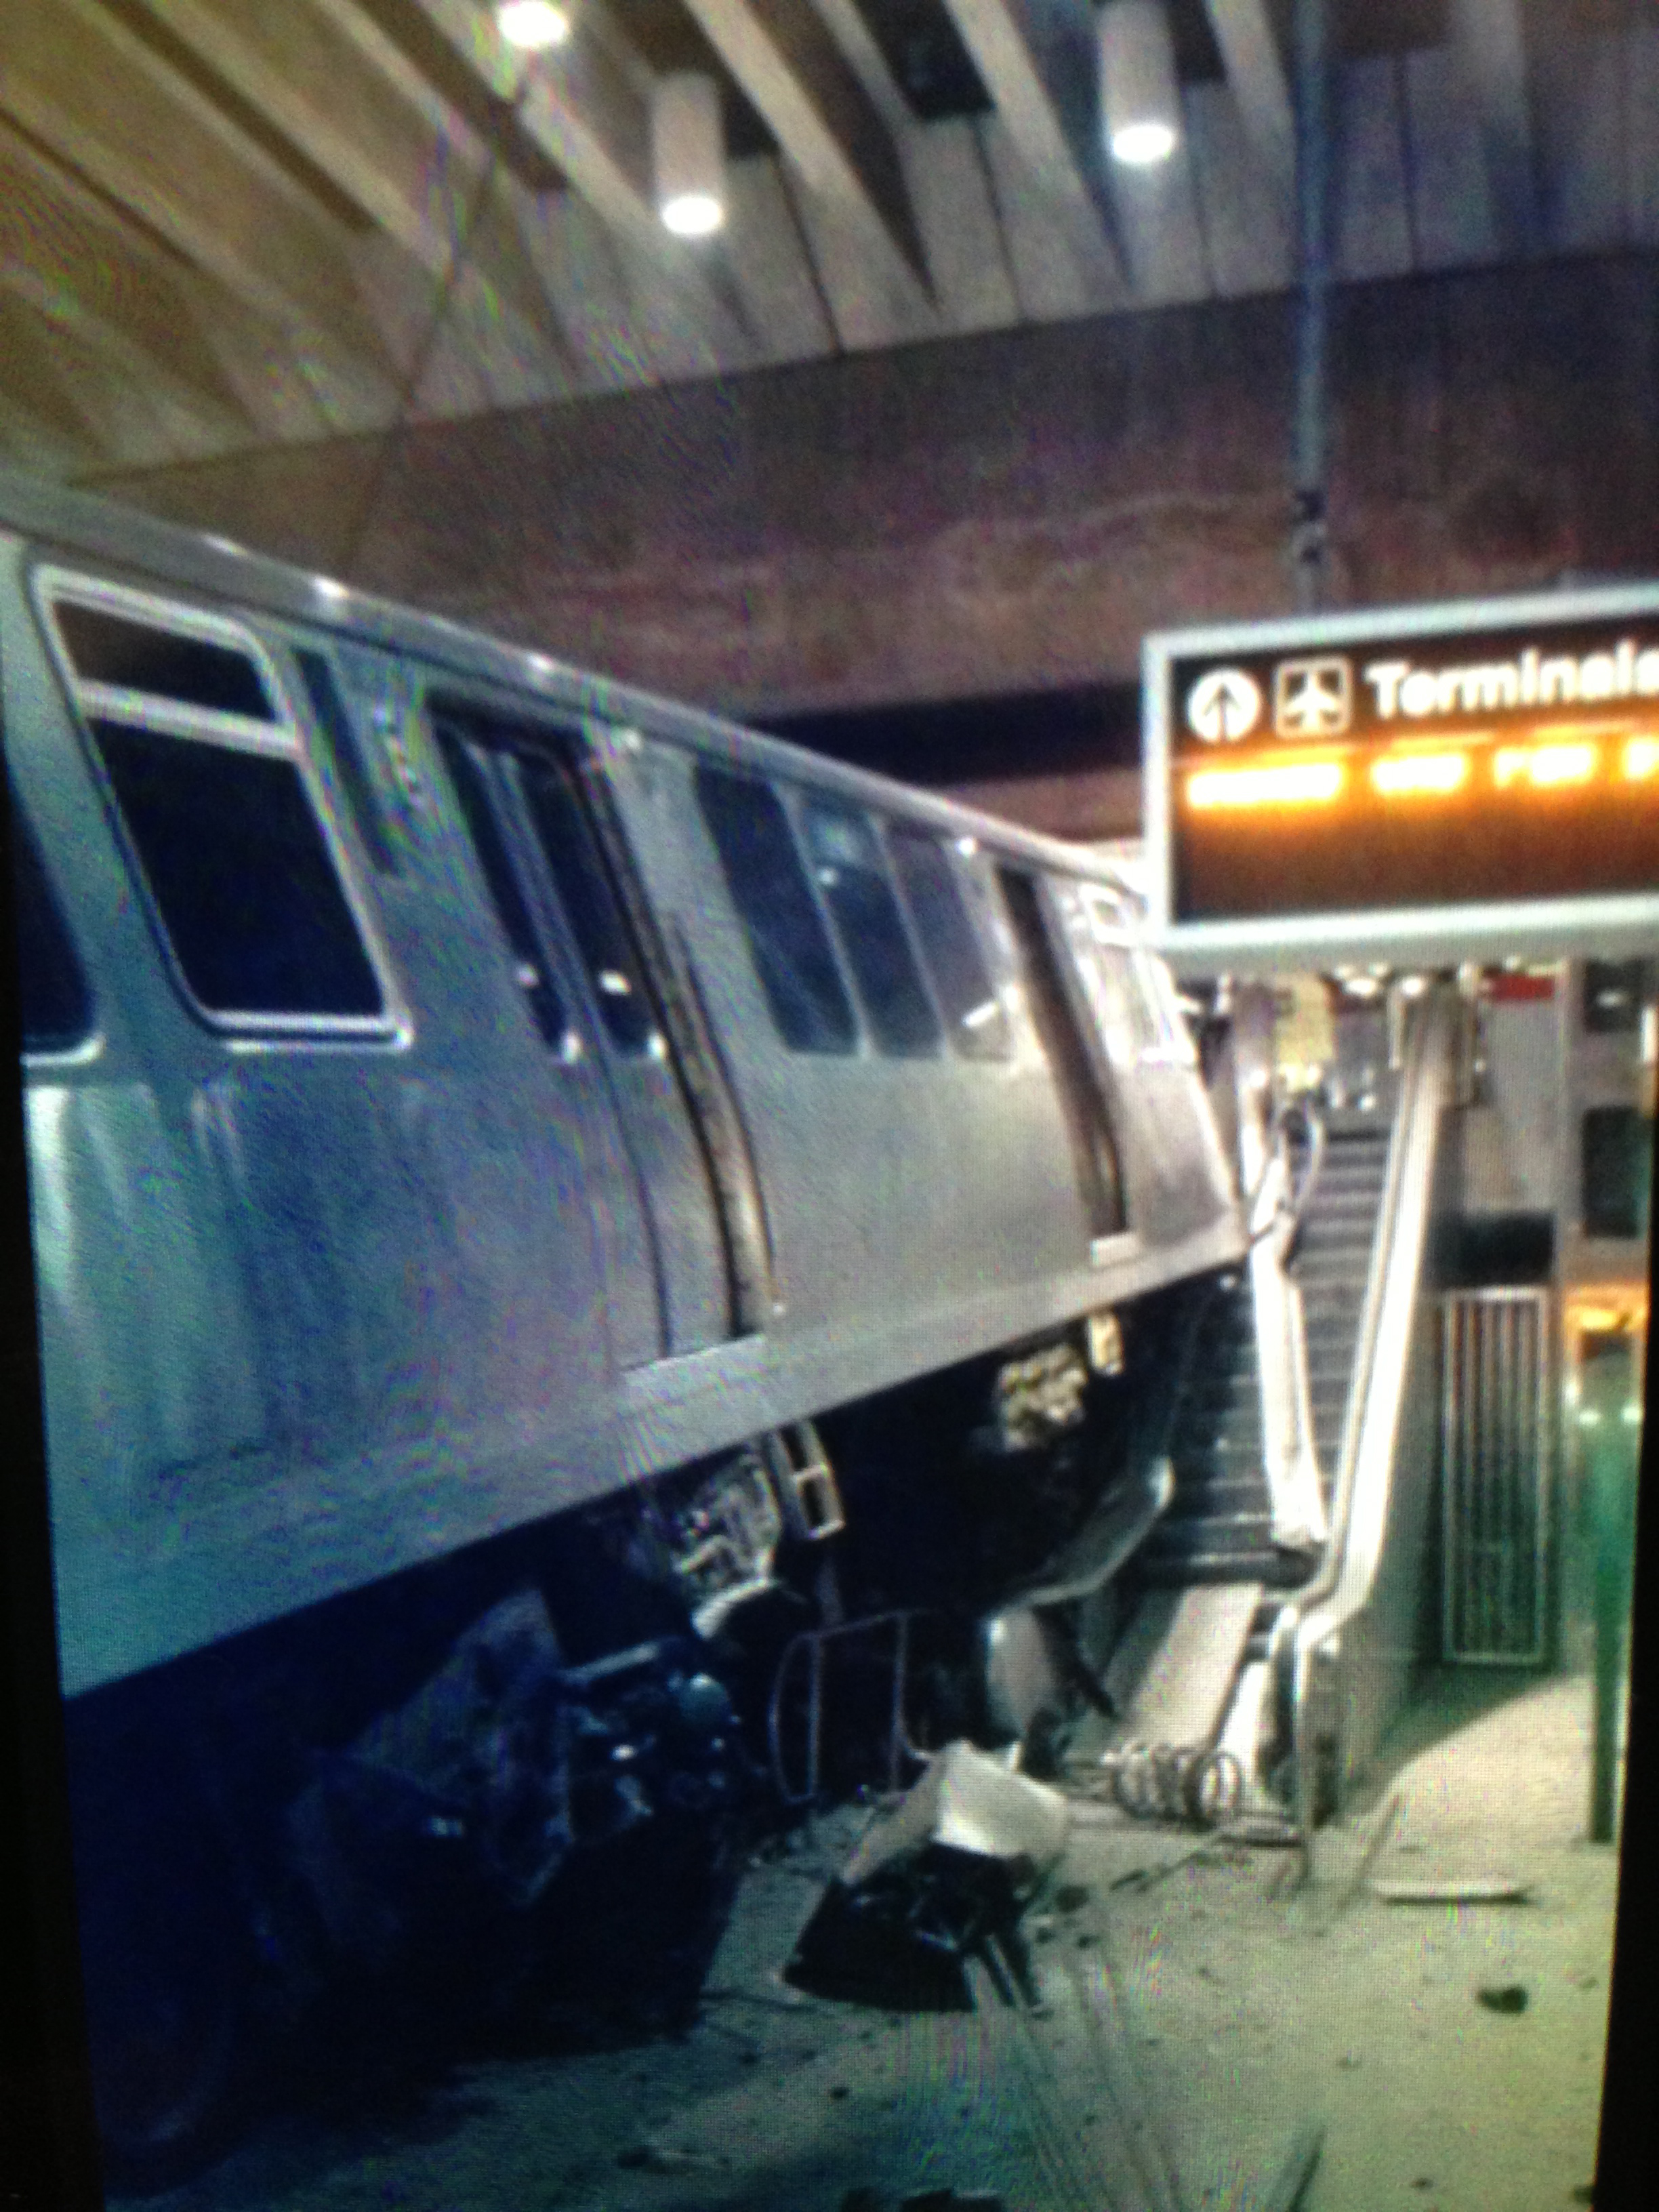 A CTA Blue Line train ended up on the escalator at the O'Hare station early Monday, after it failed to stop. (Photo supplied to CBS 2)